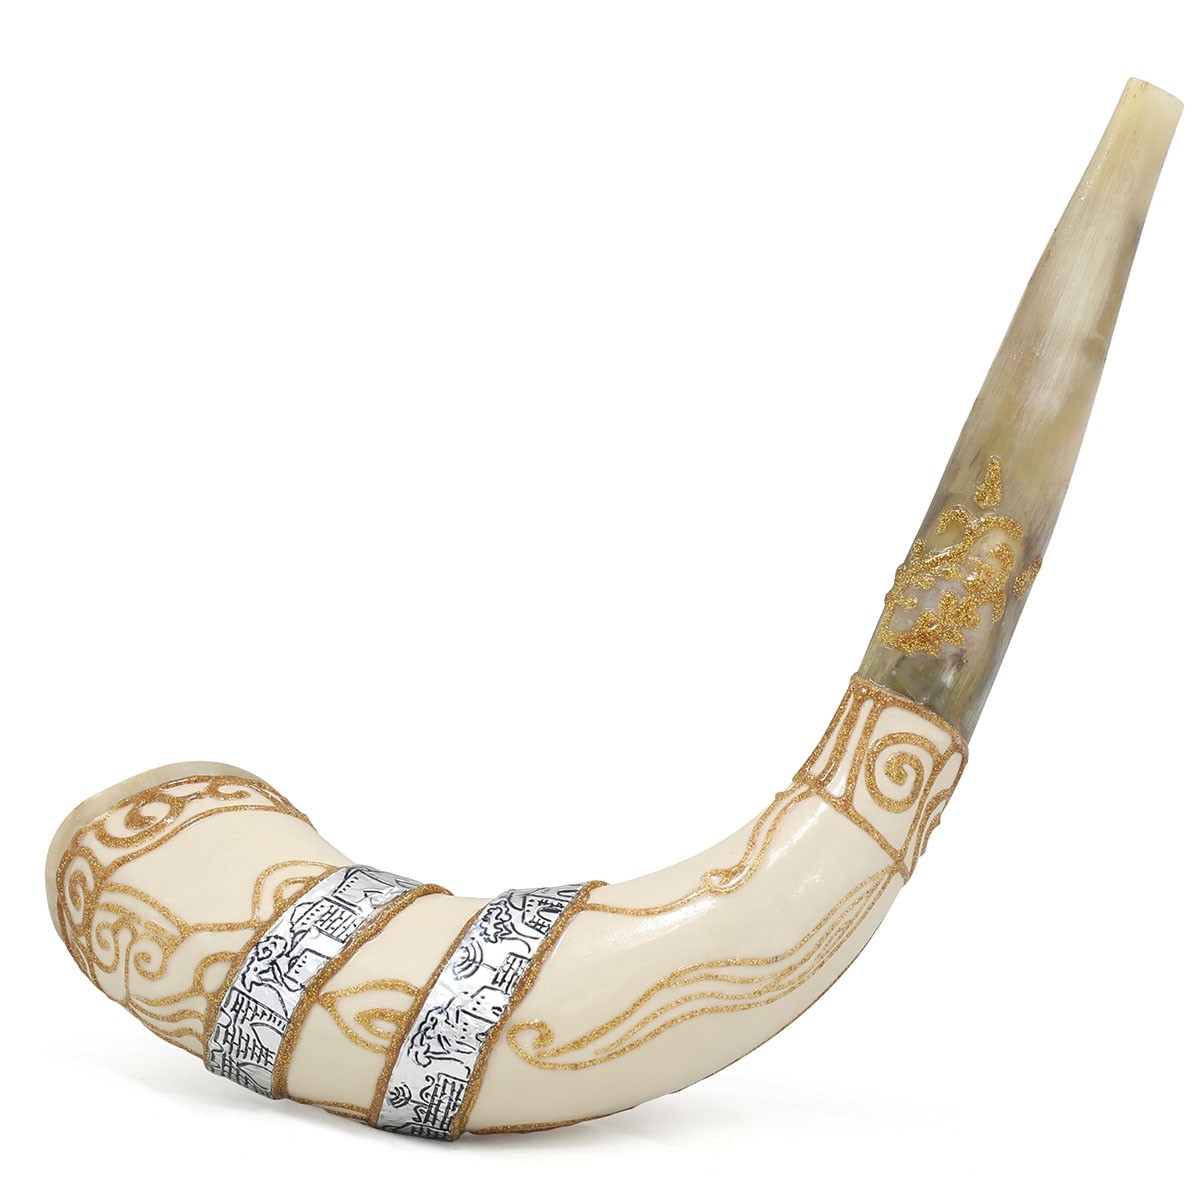 Hand Painted Ram’s Horn Shofar with White and Gold Jerusalem Design  - 1